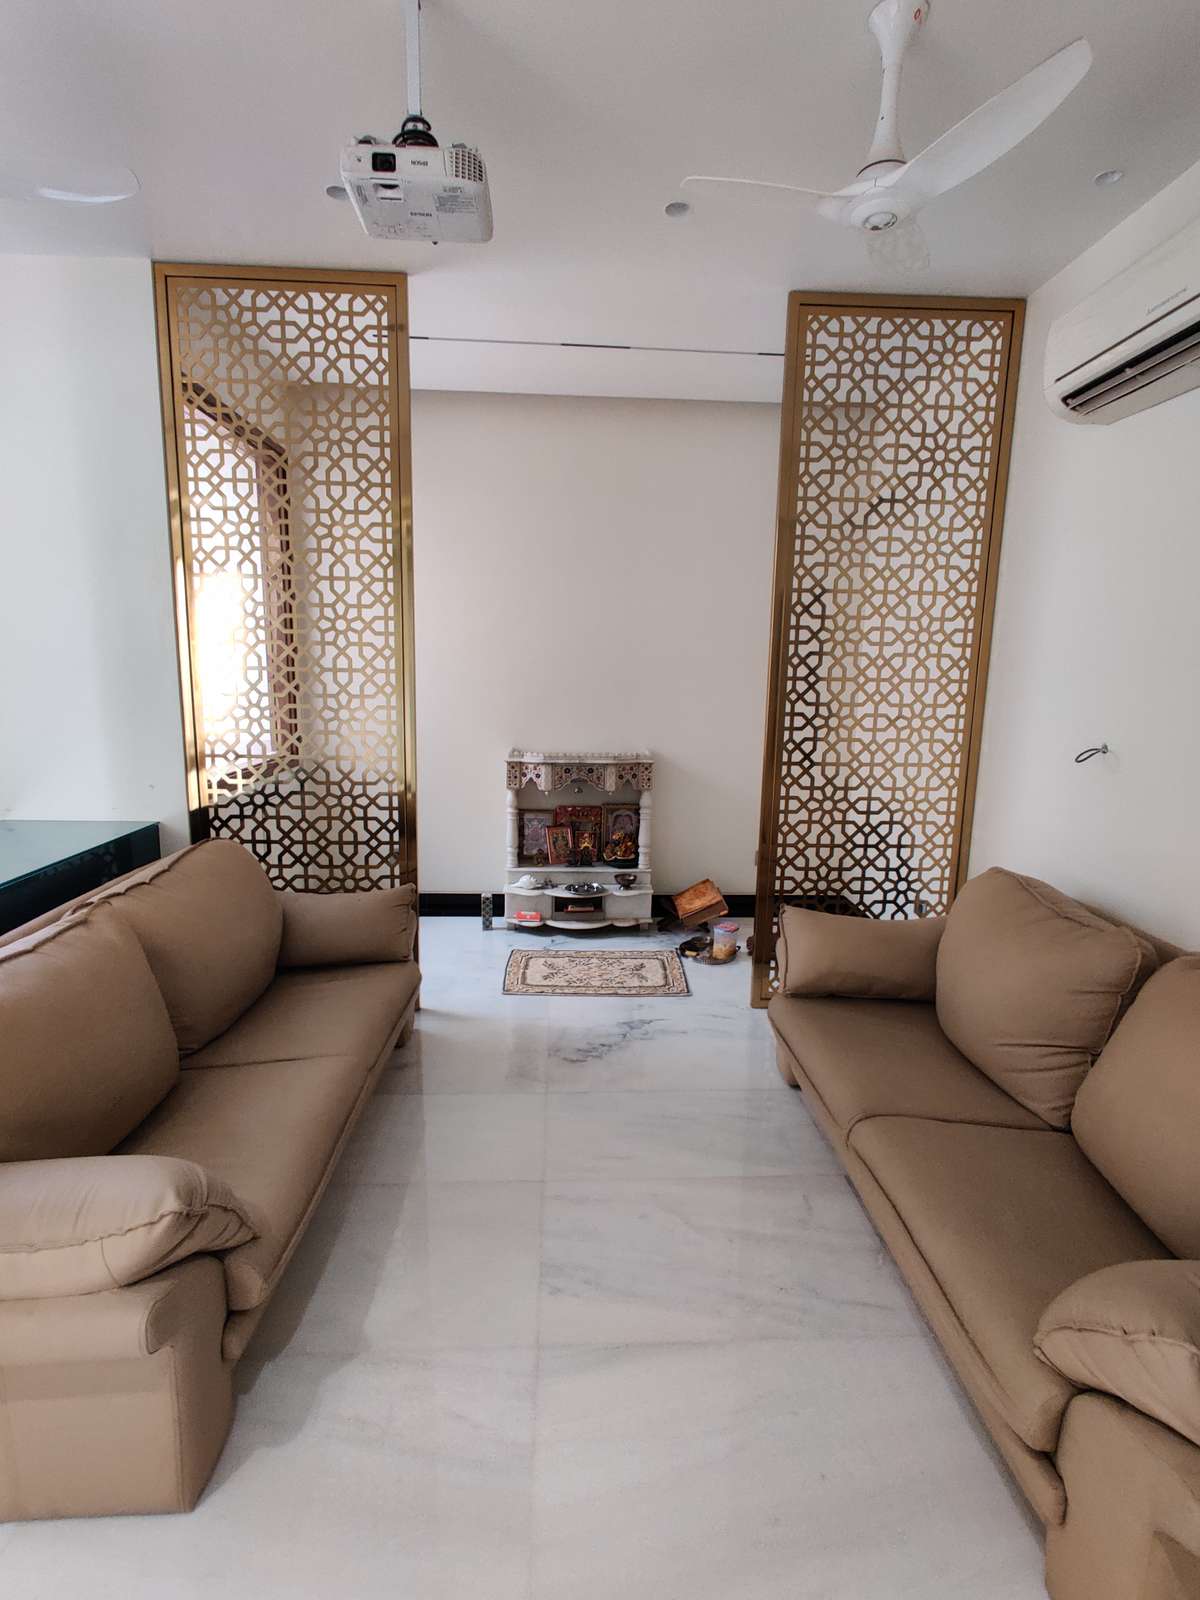 Recently completed total interior renovation of a G+1 villa at Punjabi Bagh in a very minimalistic tone and light colours. Dramatic lights and ceiling elements add to the charm of the whole space.
#InteriorDesigner #Residencedesign #residenceinterior #Minimalistic #greys #architecturedesigns #Architect #Architectural&Interior #CelingLights #Simplestyle